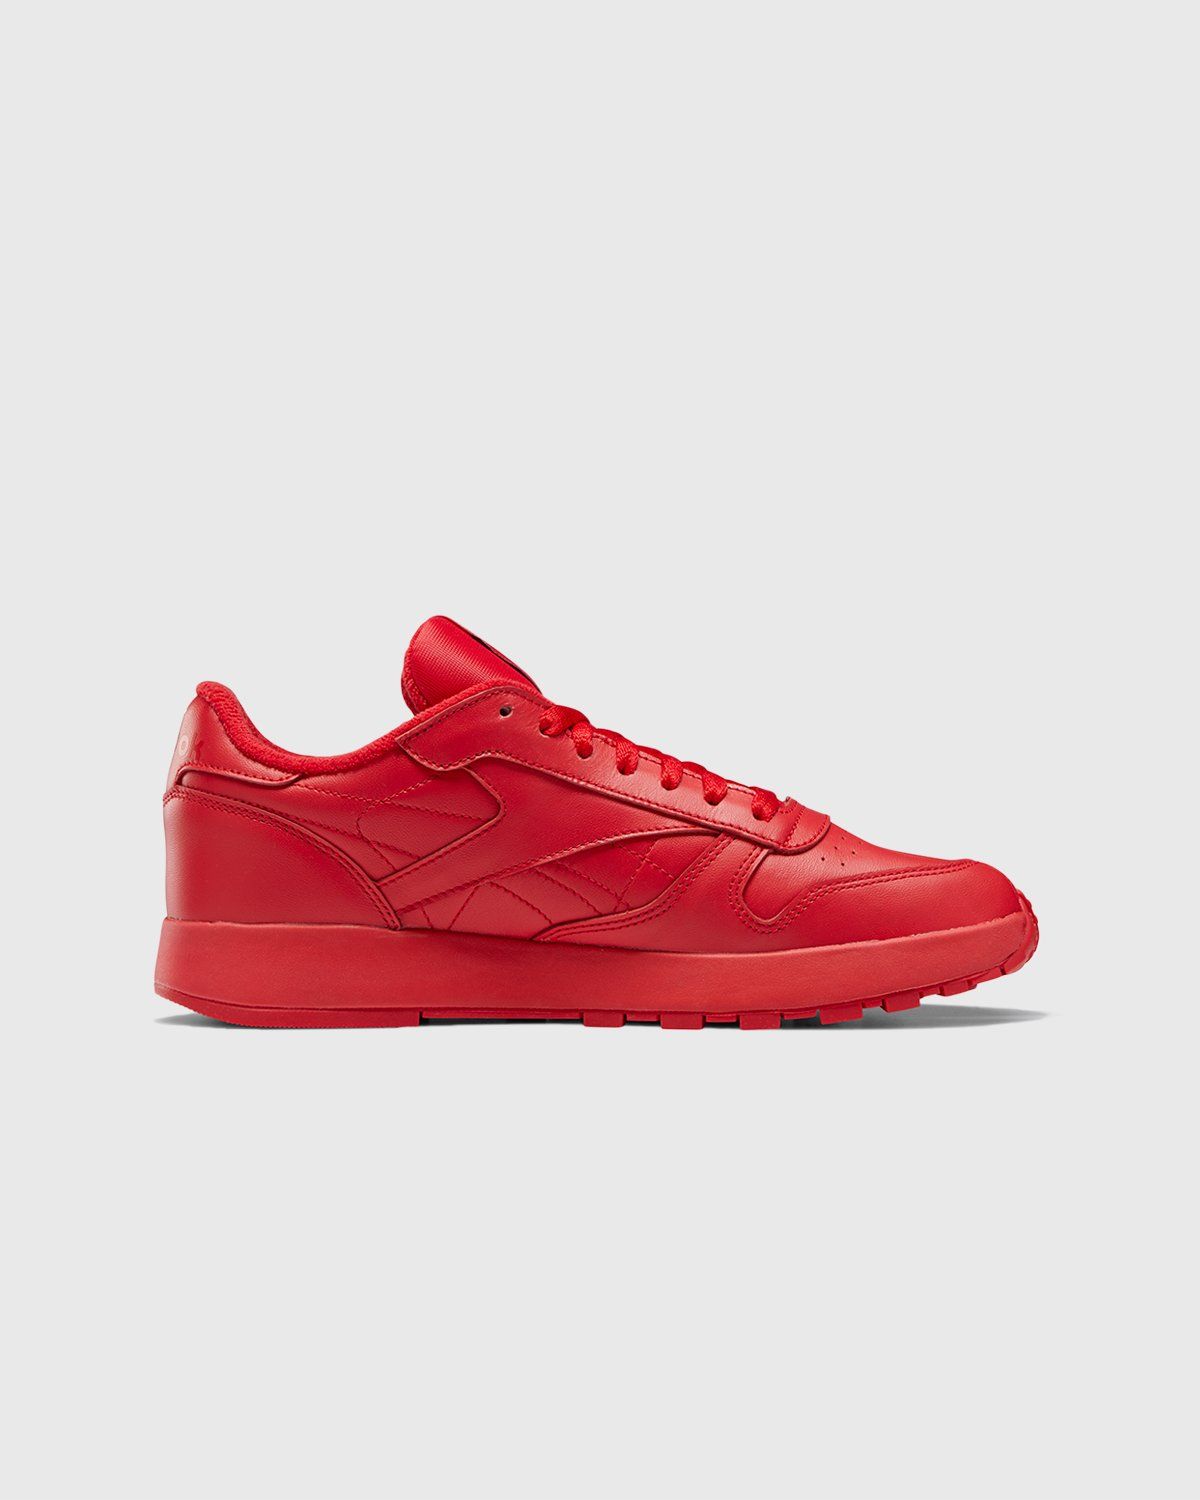 Maison Margiela x Reebok – Classic Leather Tabi Red - Sneakers - Red - Image 5